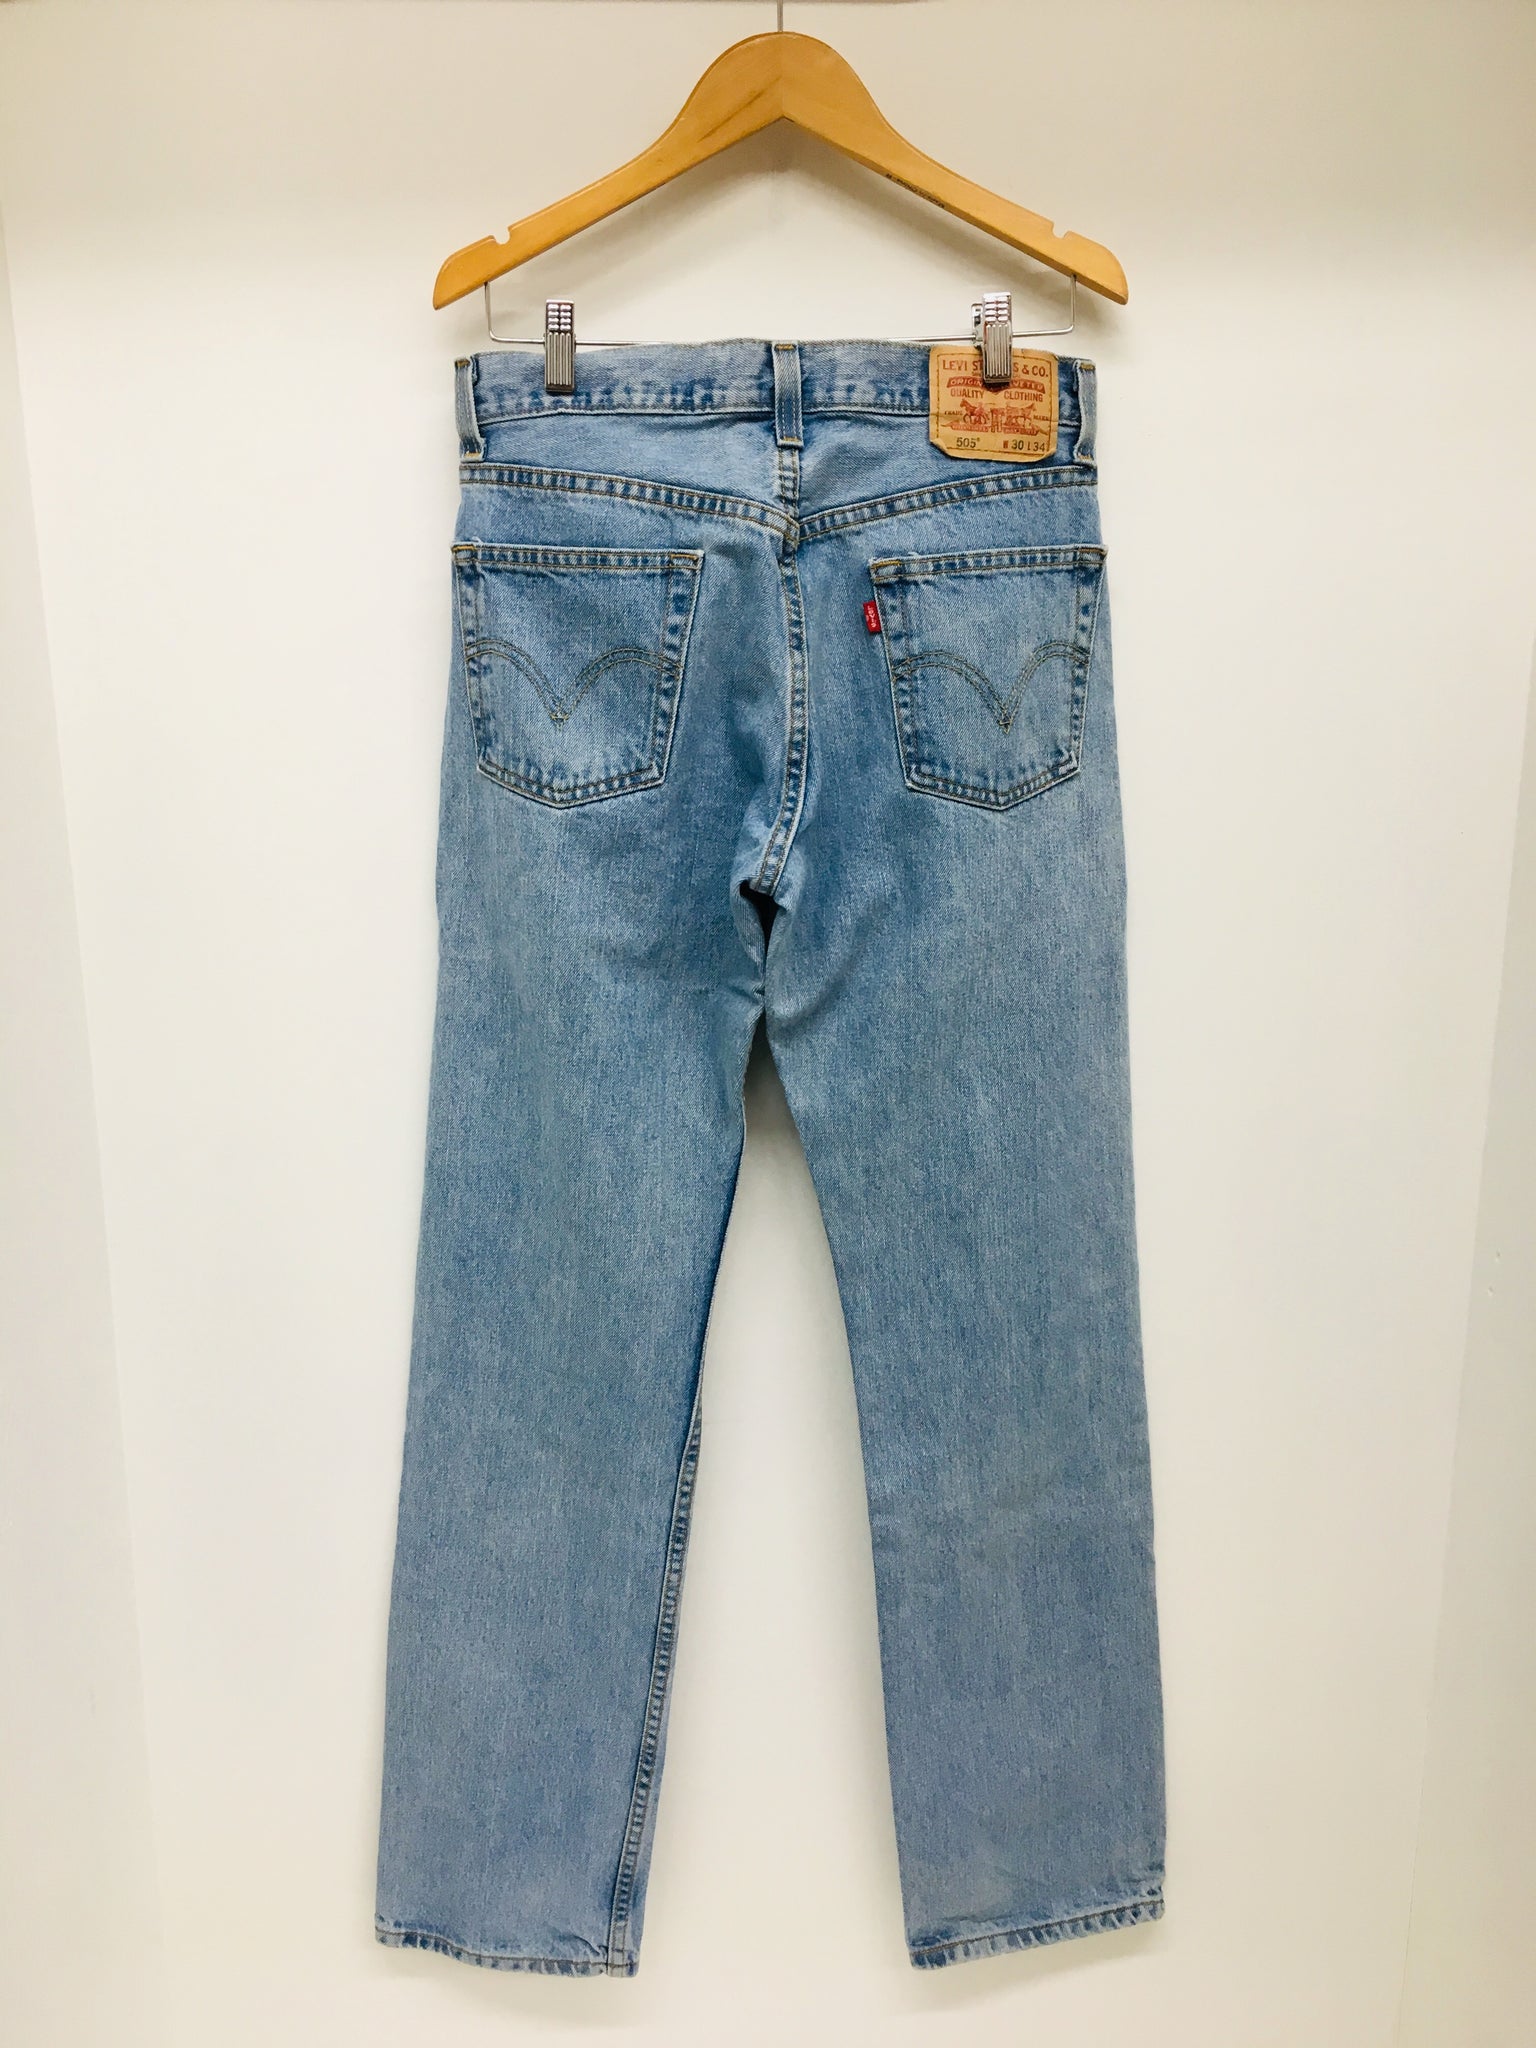 30x34 jeans